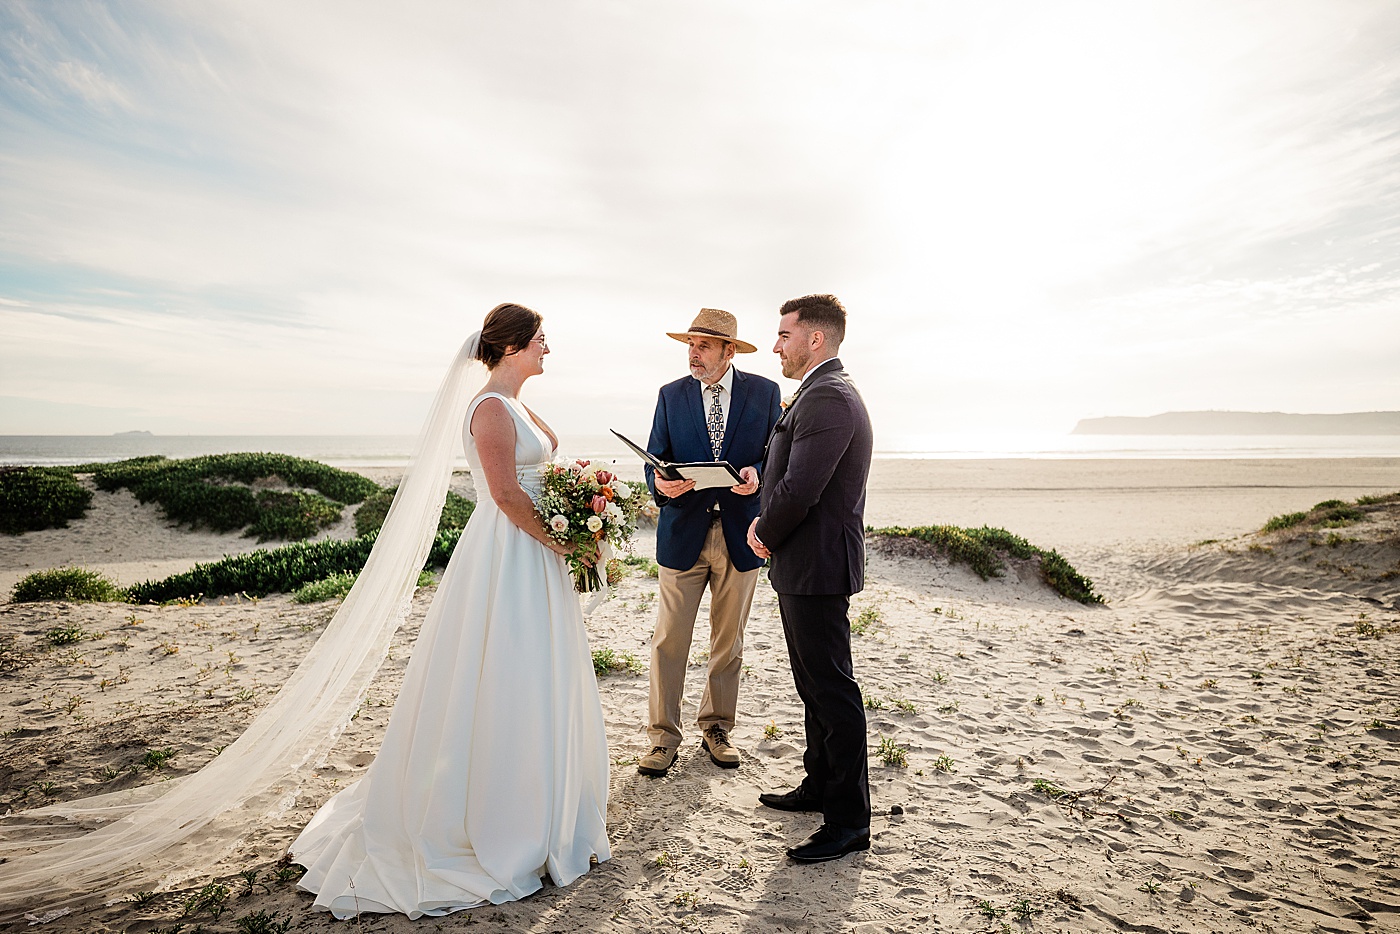 Coronado Beach elopement ceremony with bride, groom, and officiant at the dunes.